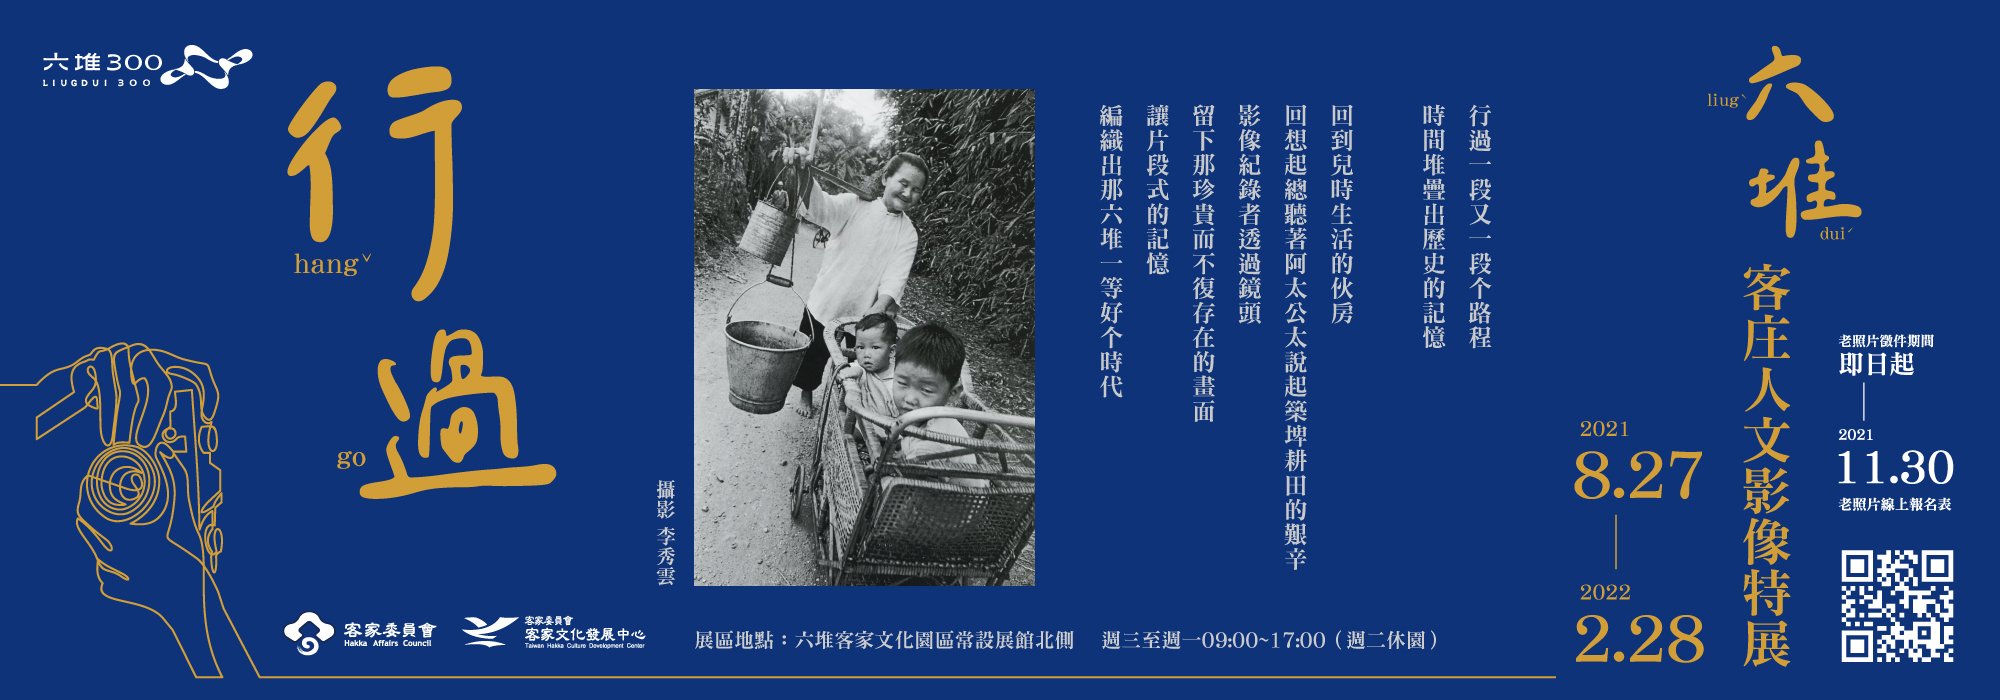 Hakka special exhibition featuring old photos of the Liudui region takes place until 2022 展示圖